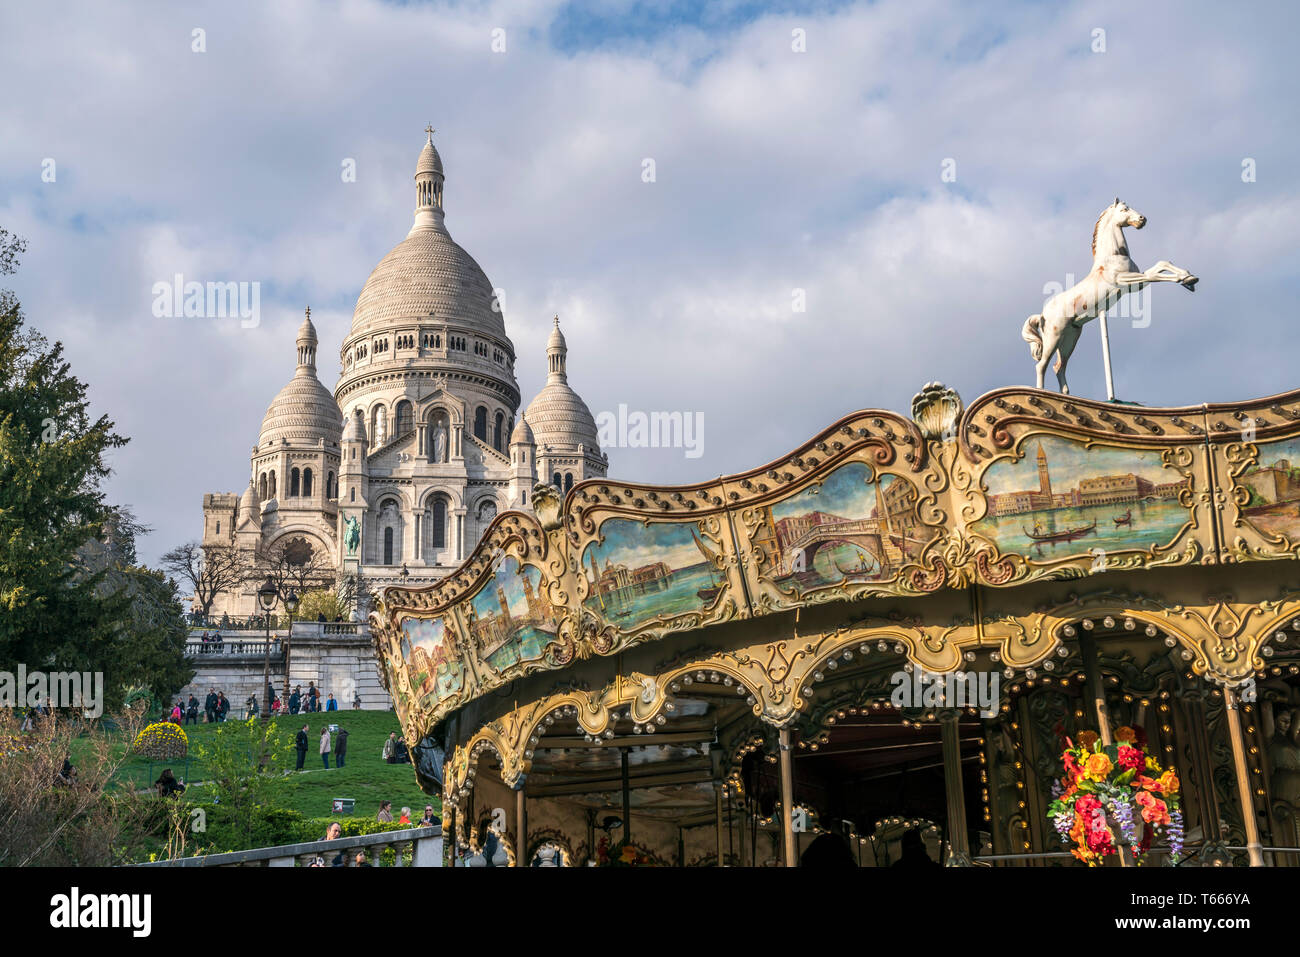 Sacre Coeur Carousel High Resolution Stock Photography And Images Alamy